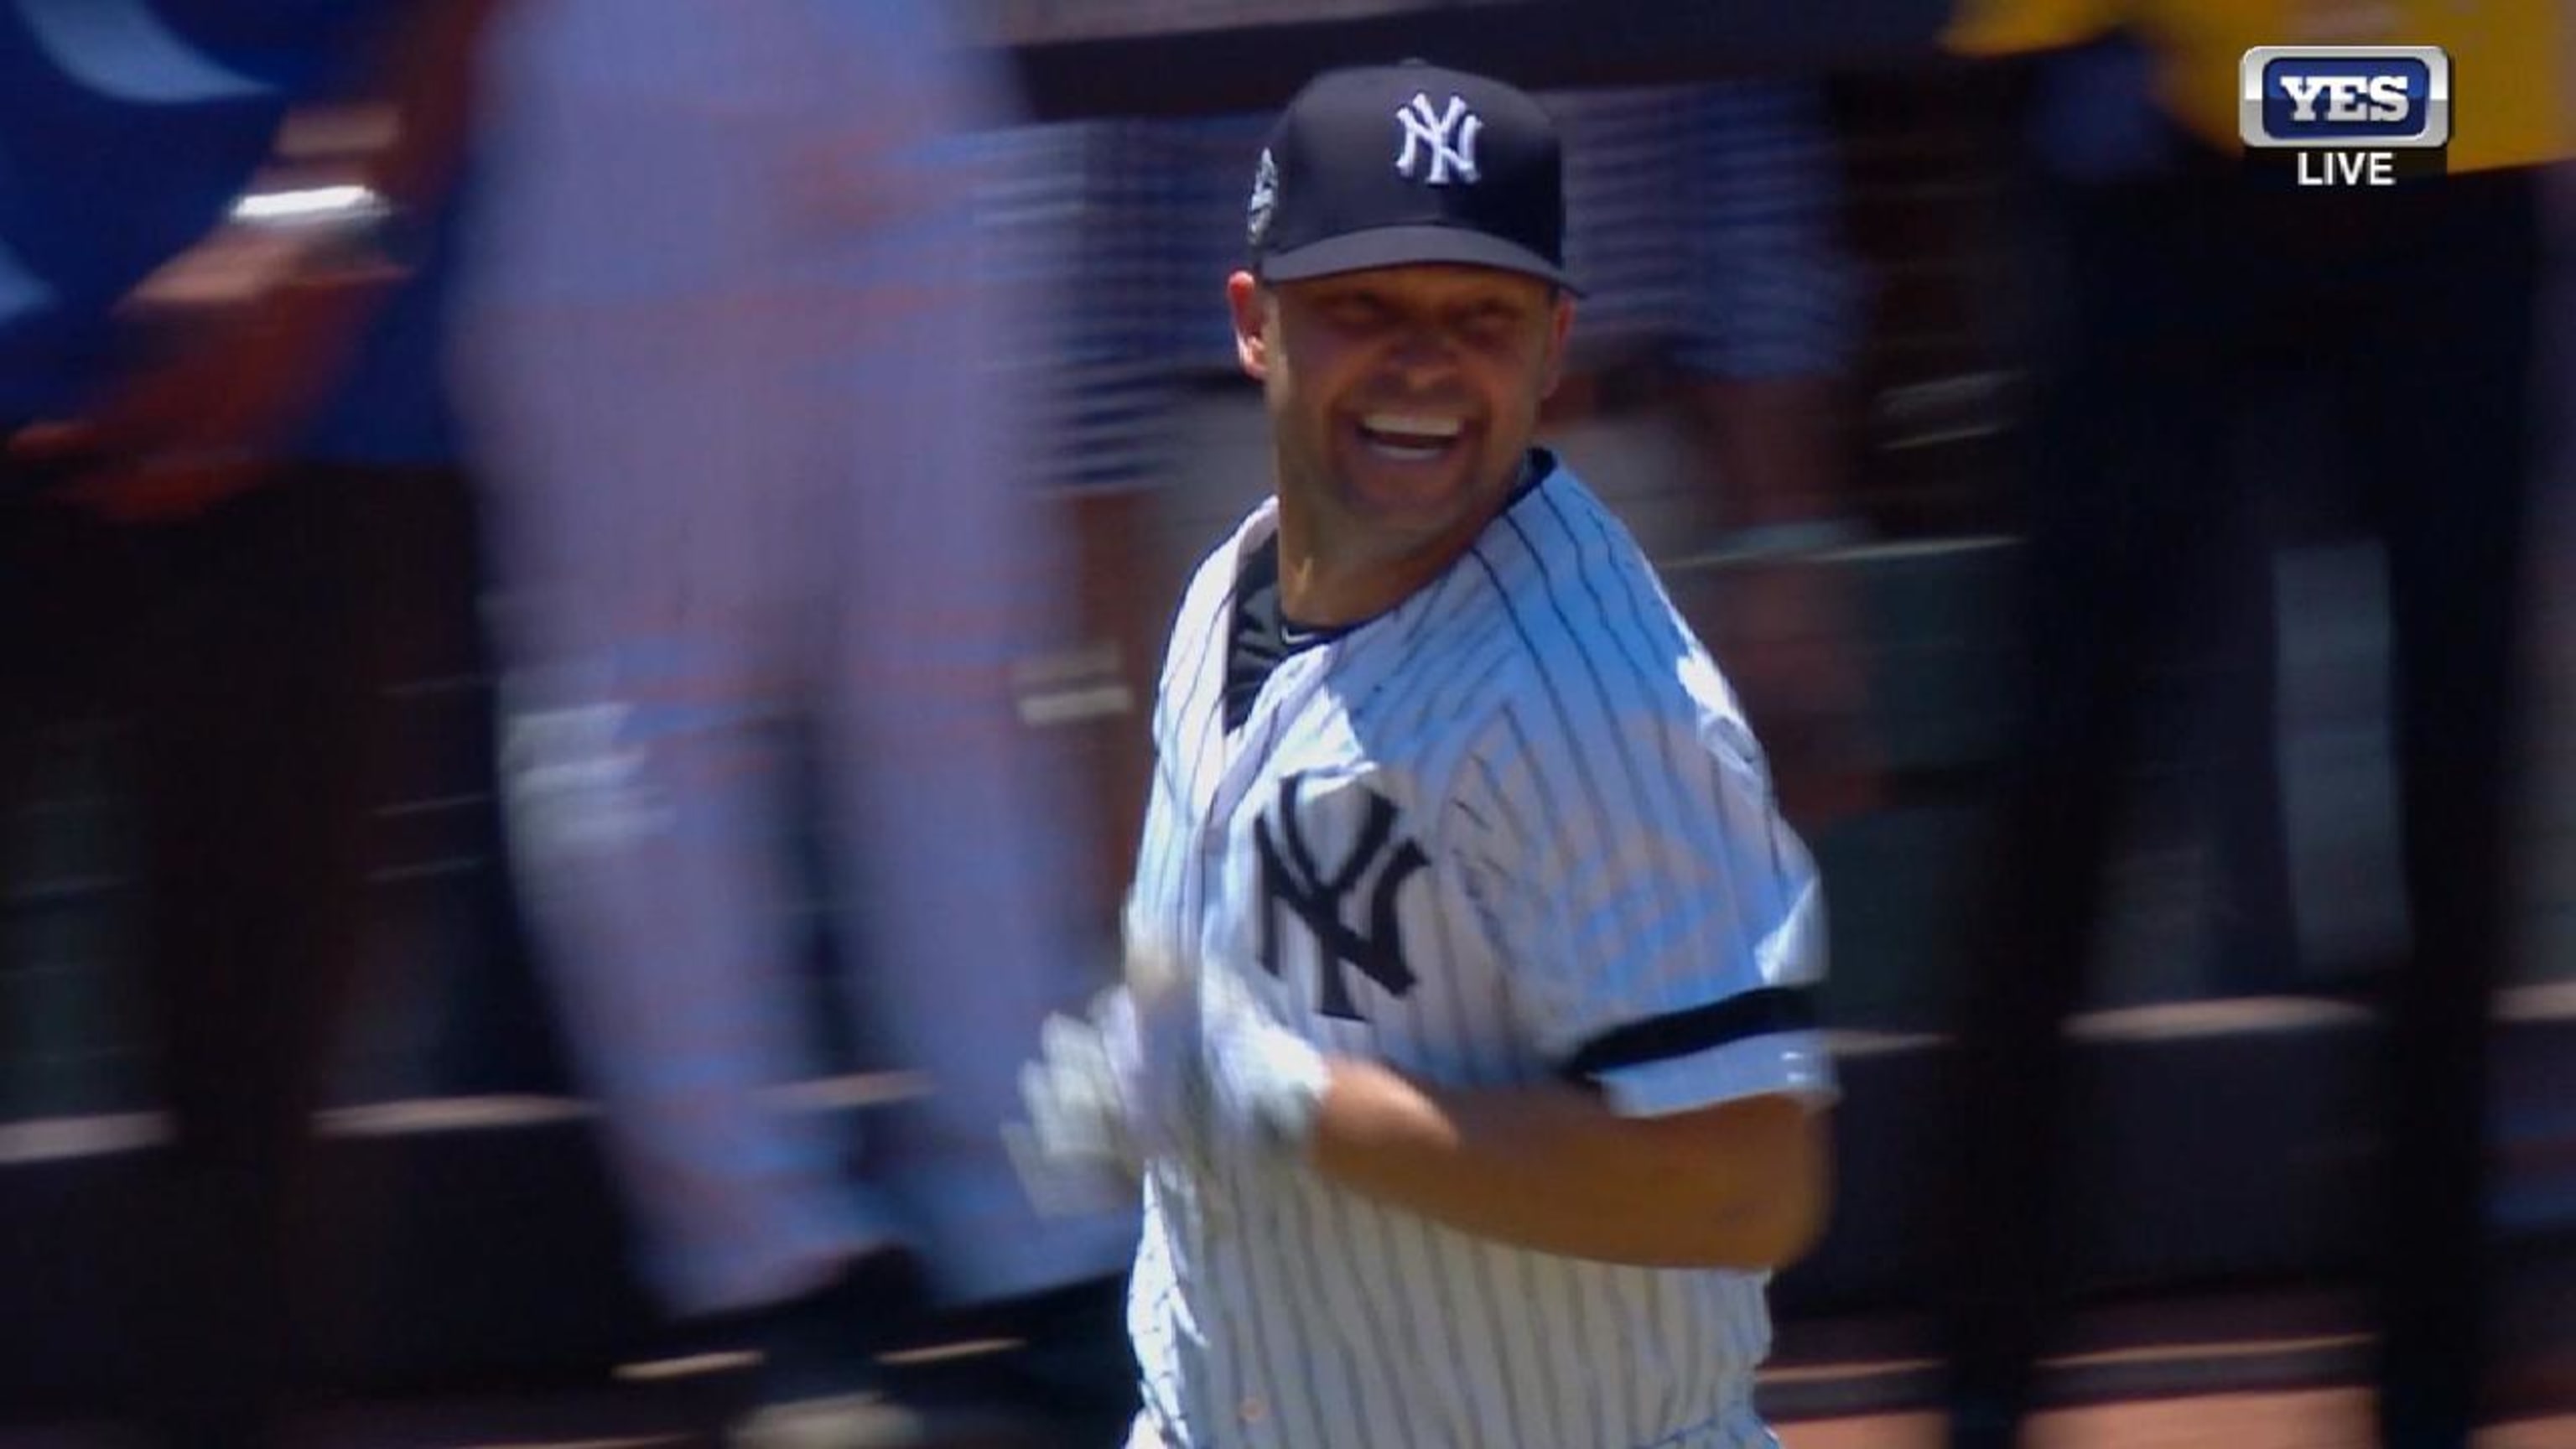 Nick Swisher blasted a second-deck homer in the Old-Timers' Day